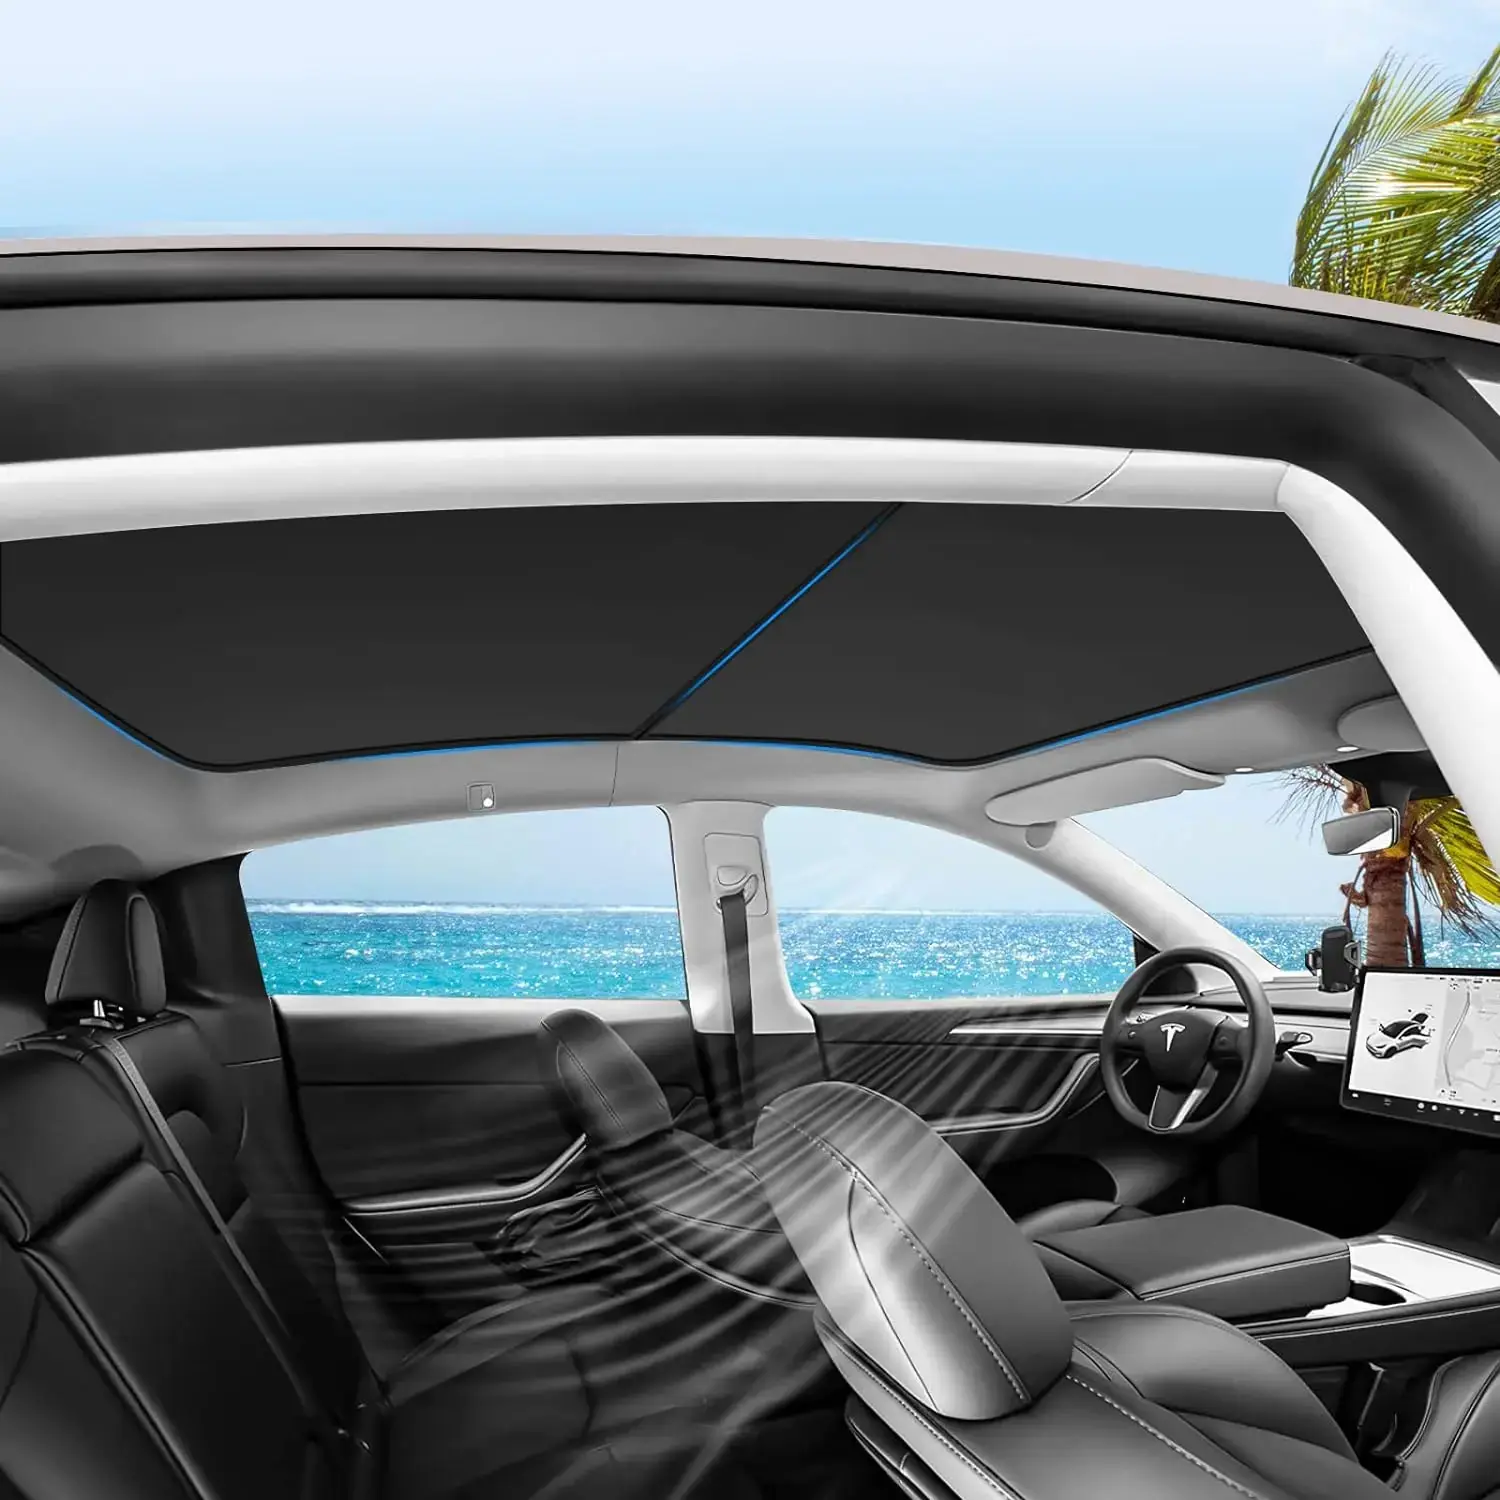 Protect Yourself from Harmful UV Rays with the Adreama Tesla Model Y Roof Sun Shade